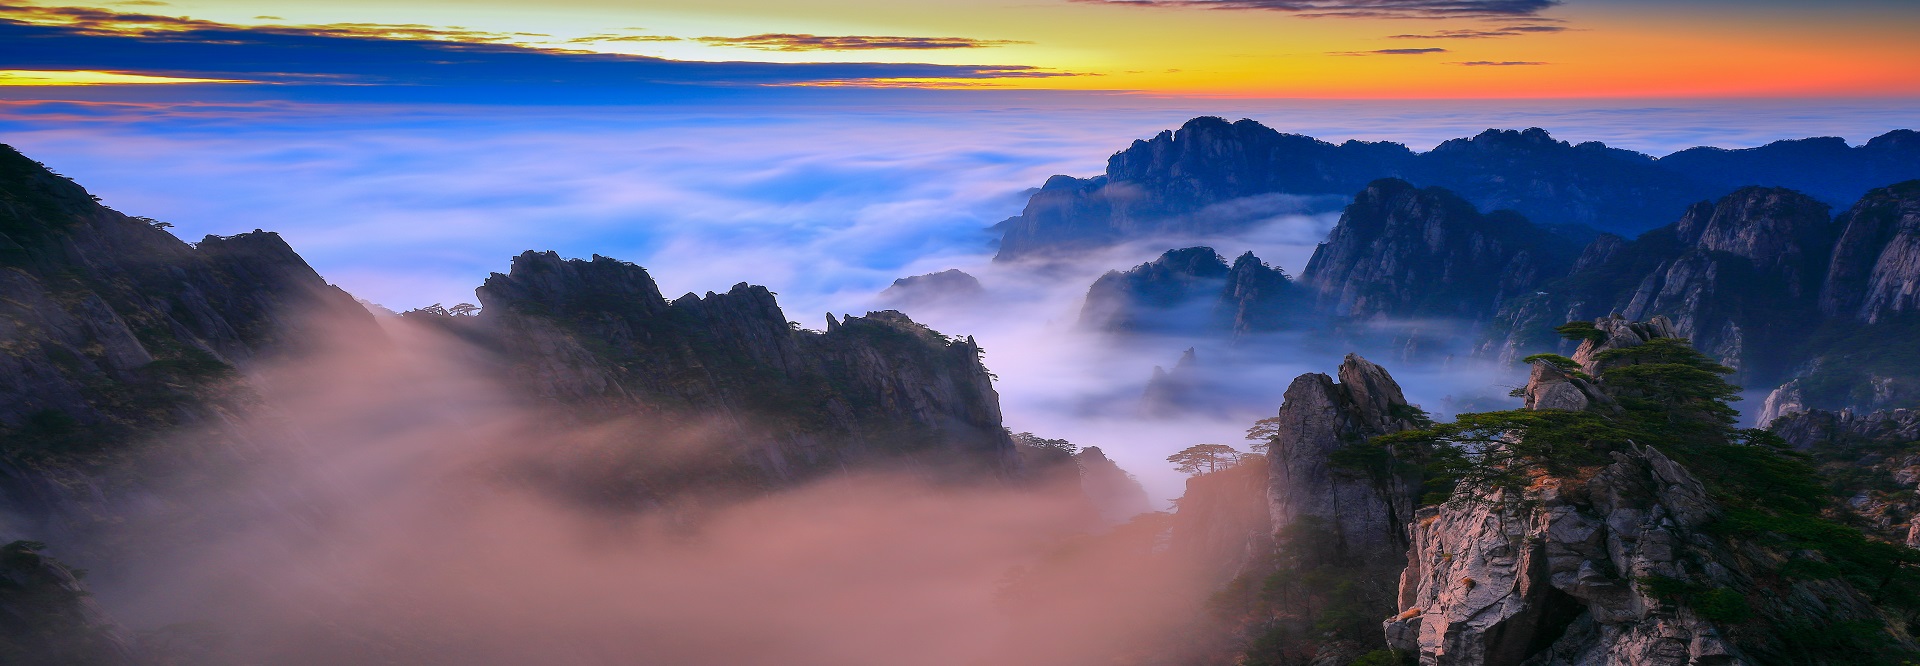 Huangshan Scenic Area uses smart tech to boost sustainable tourism